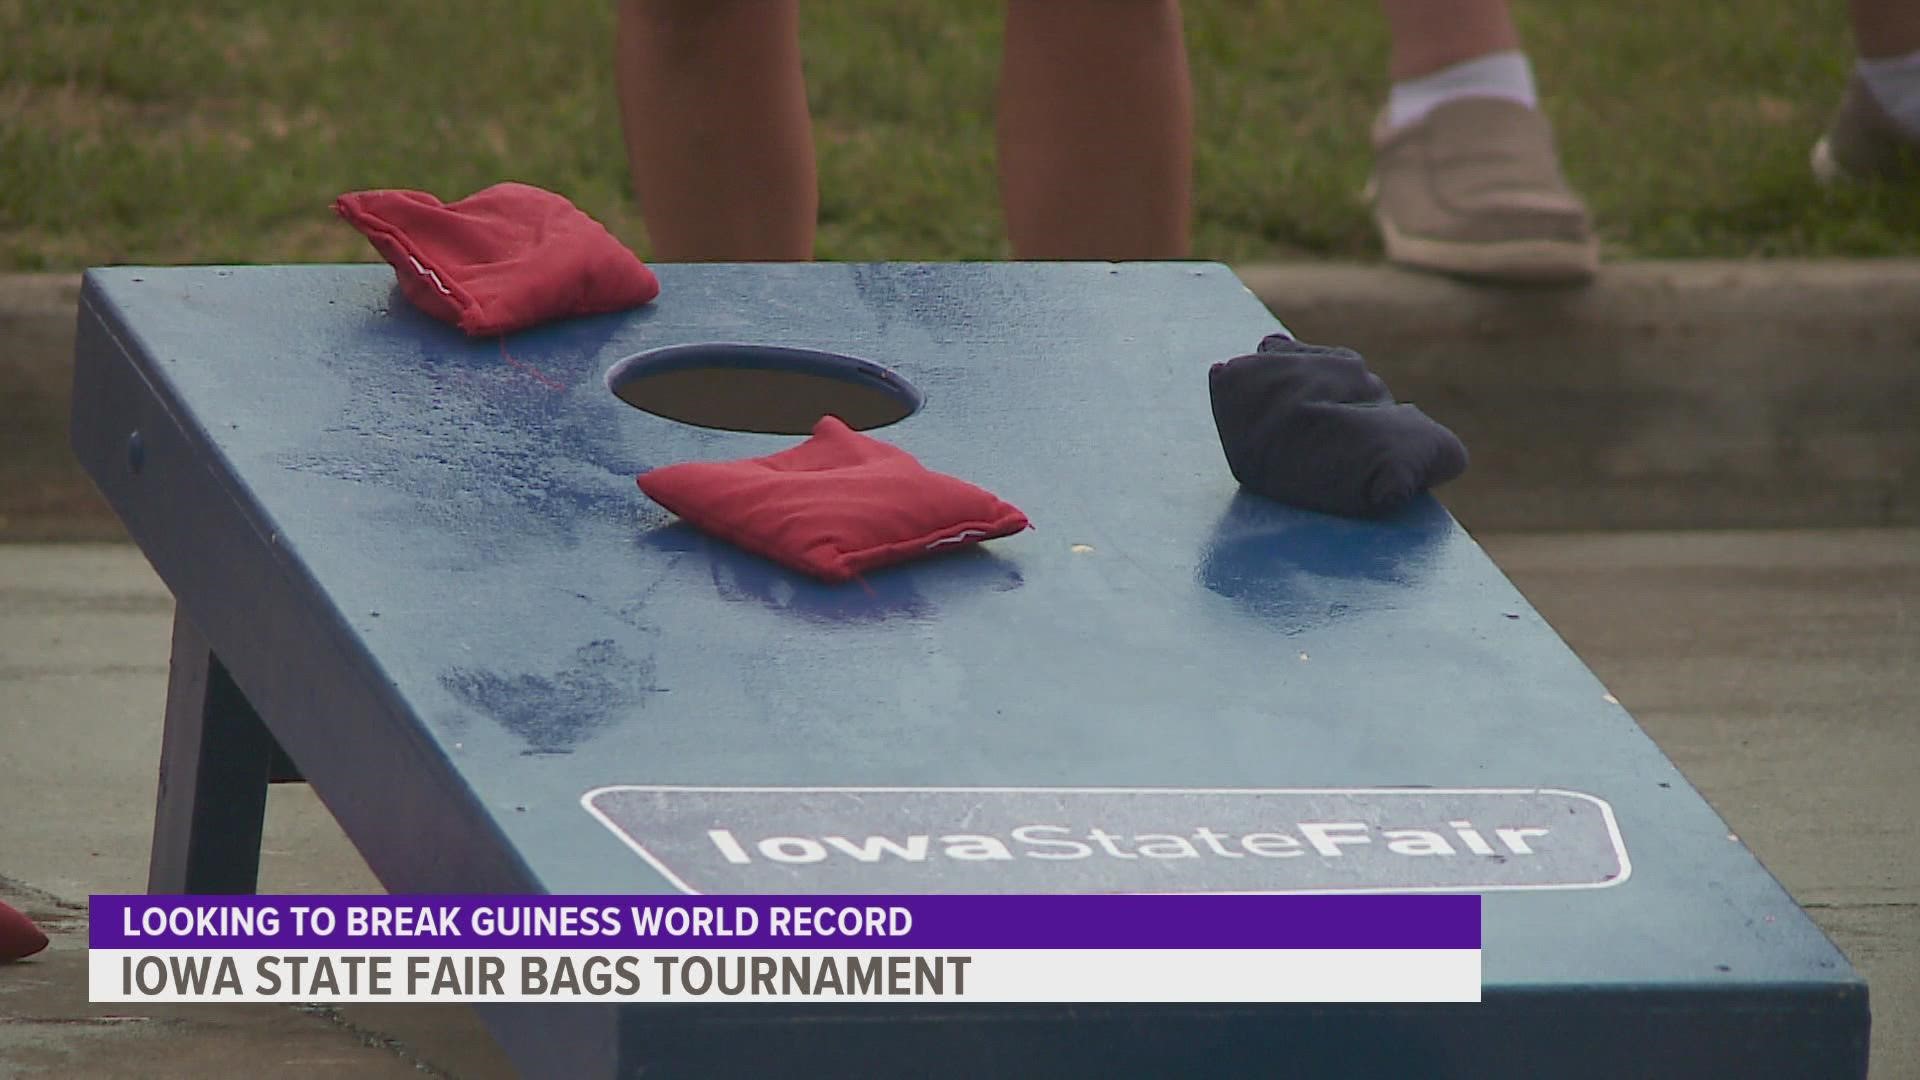 According to the Iowa State Fair, 730 people took part in the tournament, meaning they should break the world record by several 100 people.